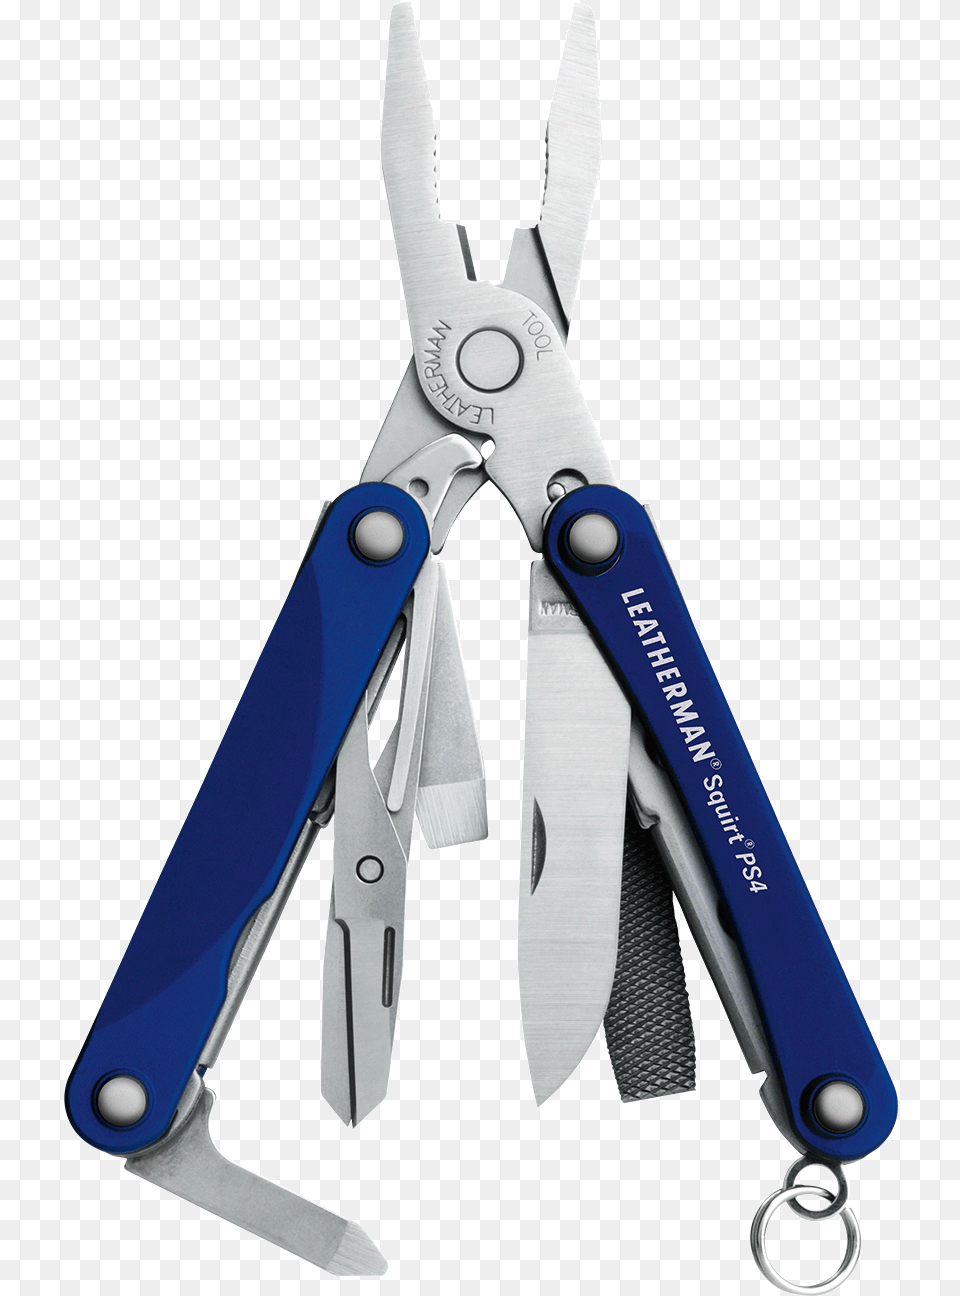 Squirt Ps4 Multitool Blue Leatherman Squirt, Device, Scissors, Pliers, Tool Png